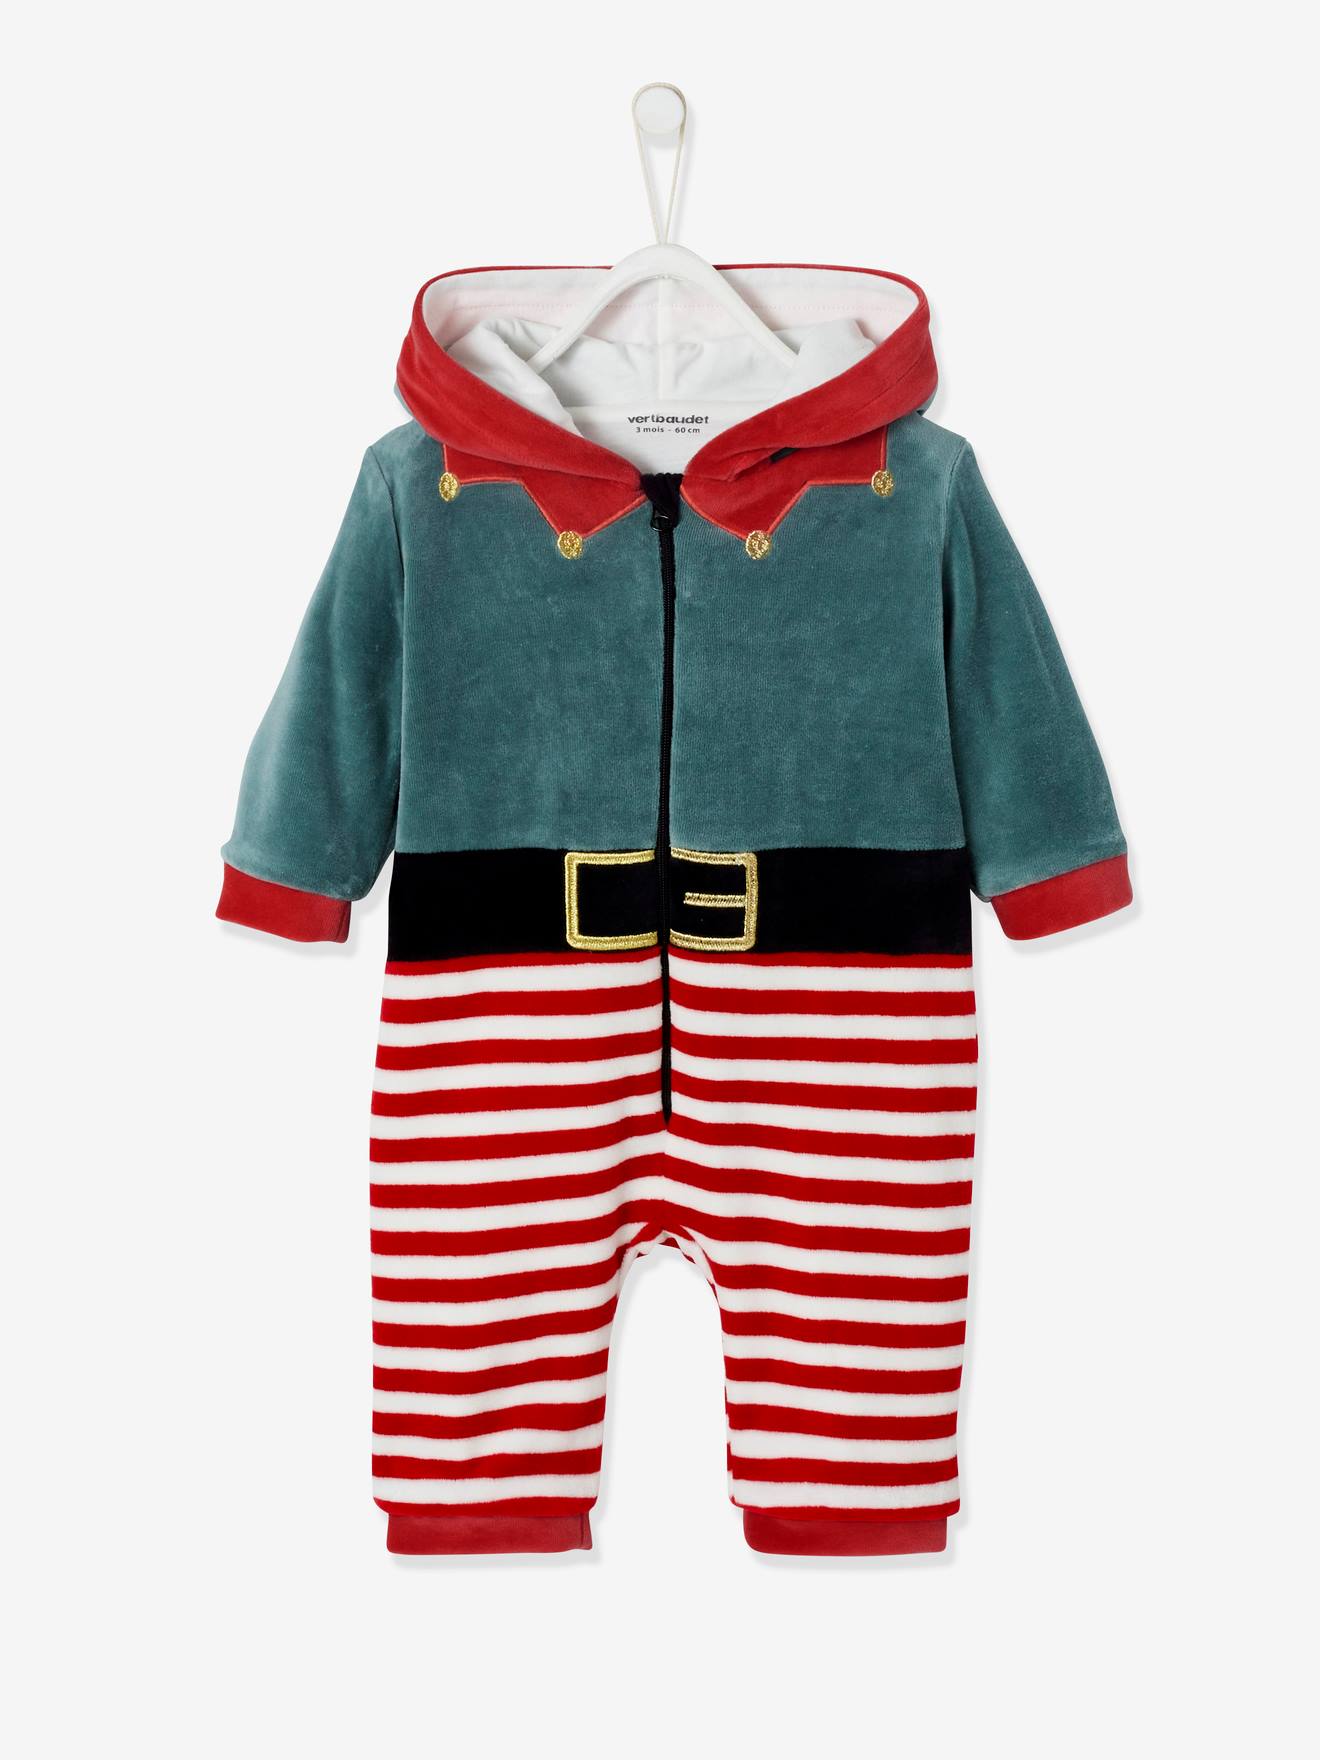 Velour "Father Christmas" Jumpsuit, Unisex, for Babies dark red